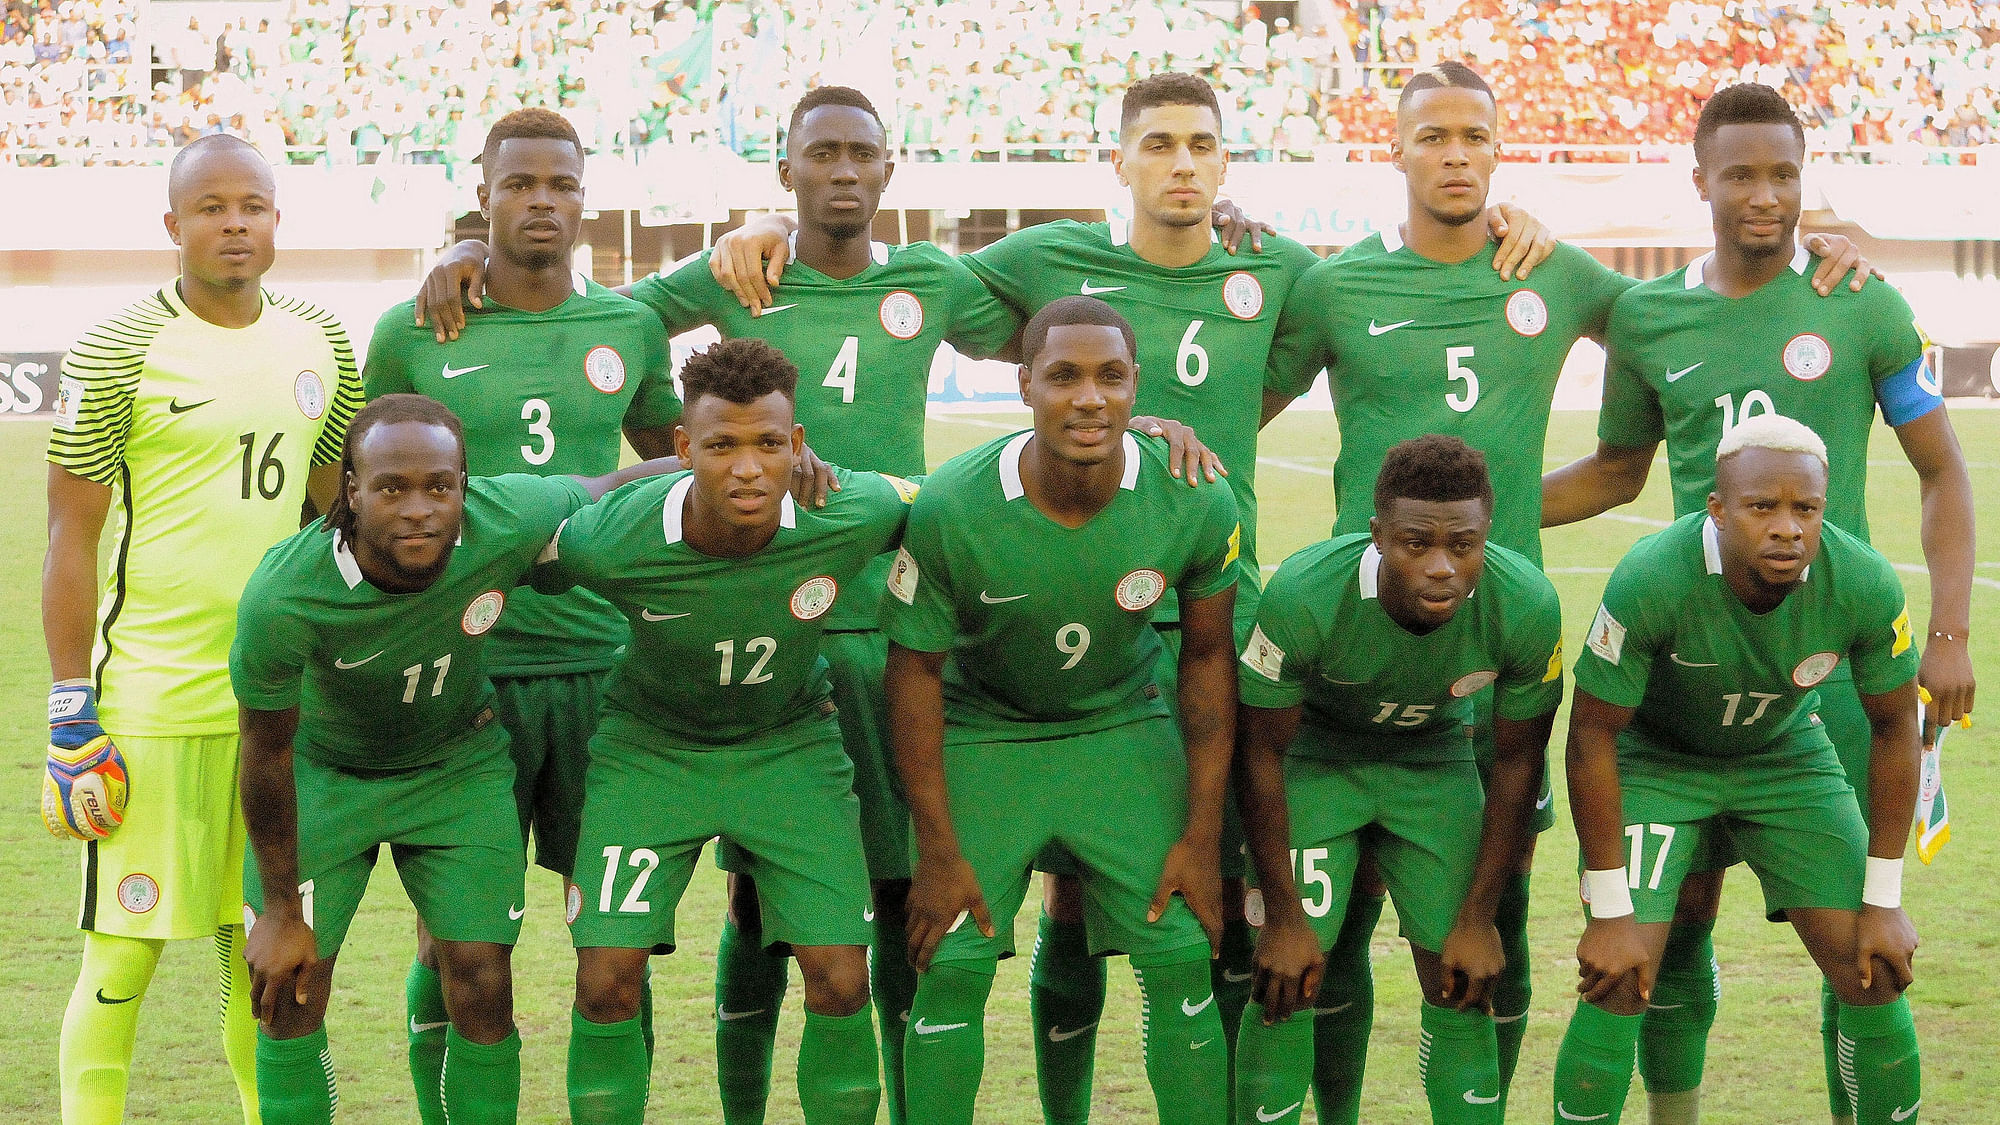 Nigeria’s team poses for photos before a World Cup football qualifier match against Zambia.